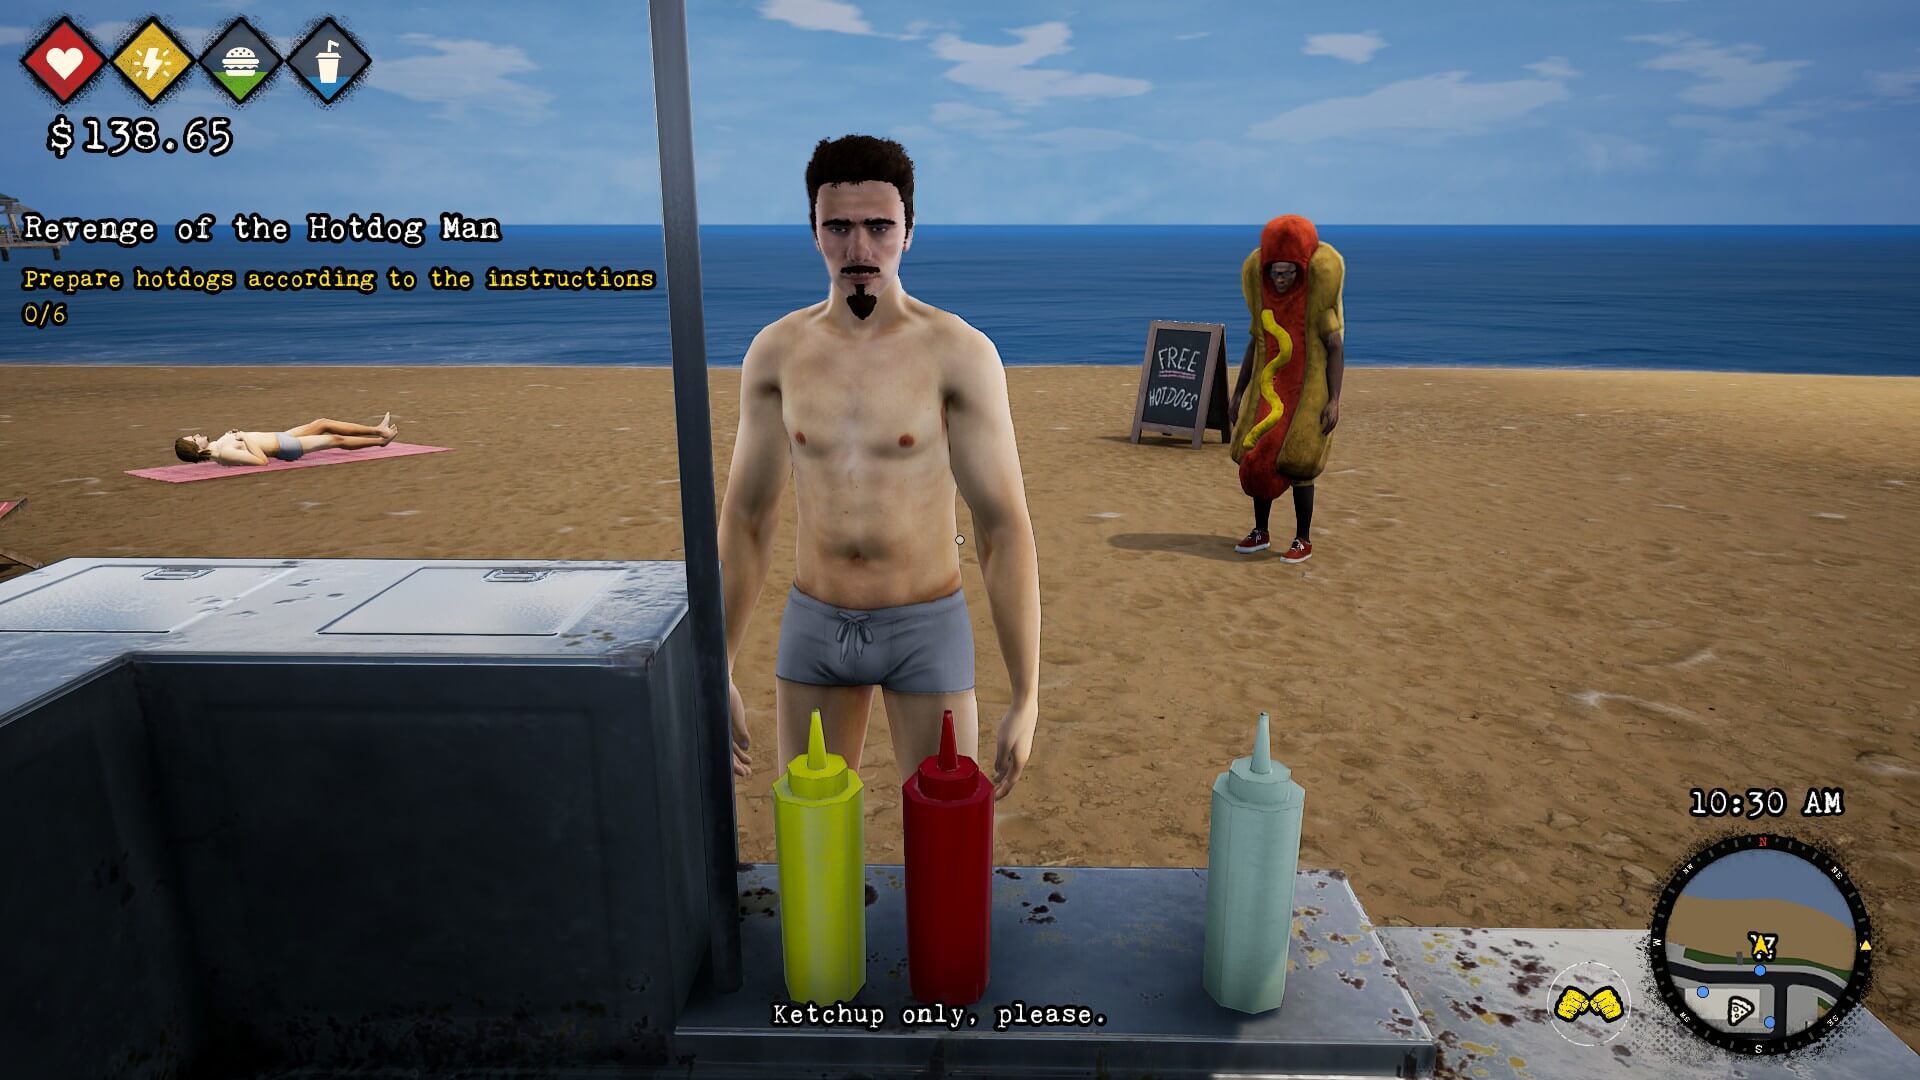 A man in just his boxers has asked me for a hot dog with just ketchup. The stand is on a beach is being promoted by the staring man in the hot dog costume.